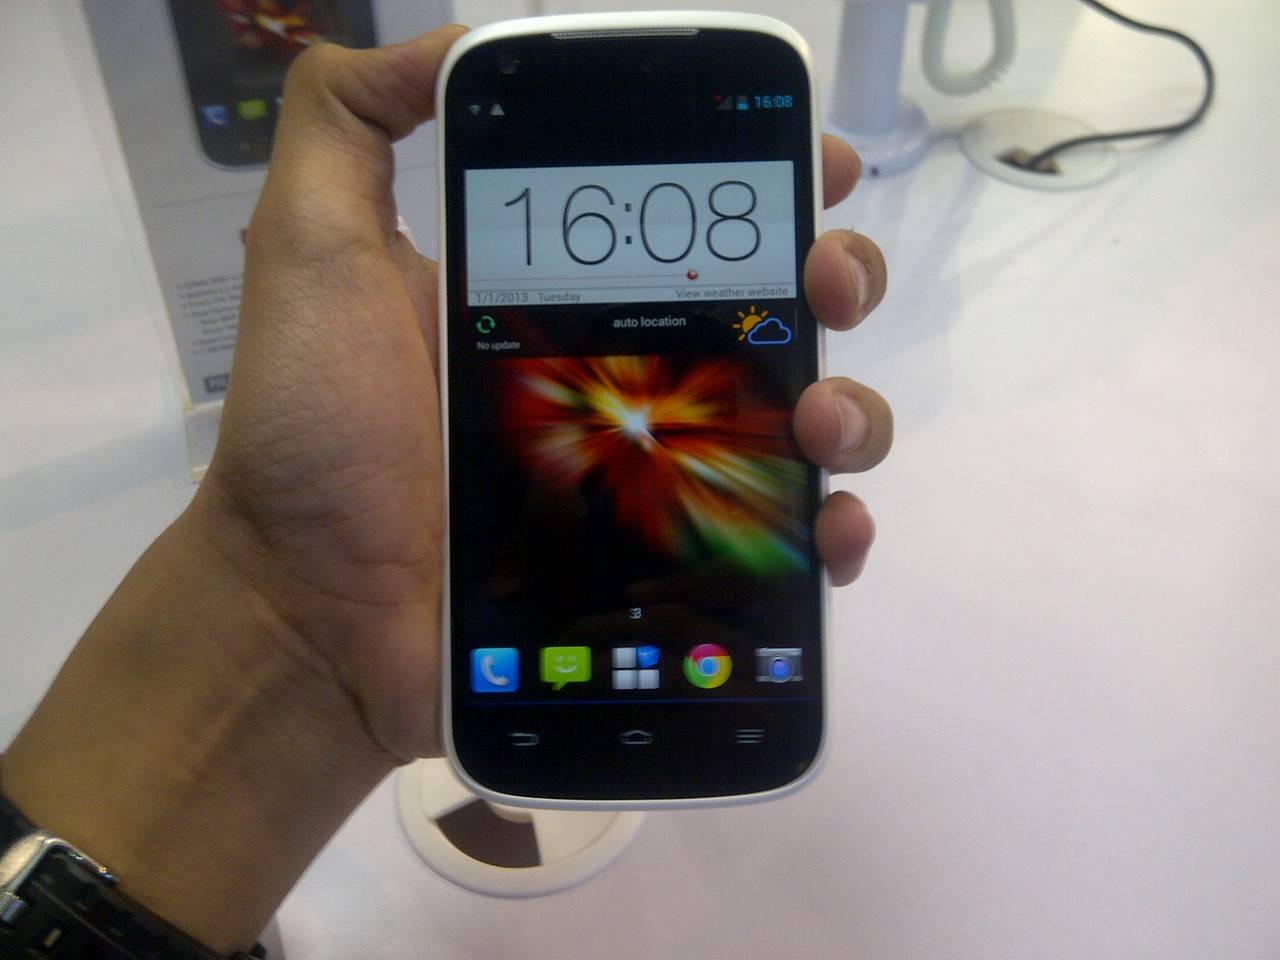 stock rom andromax a